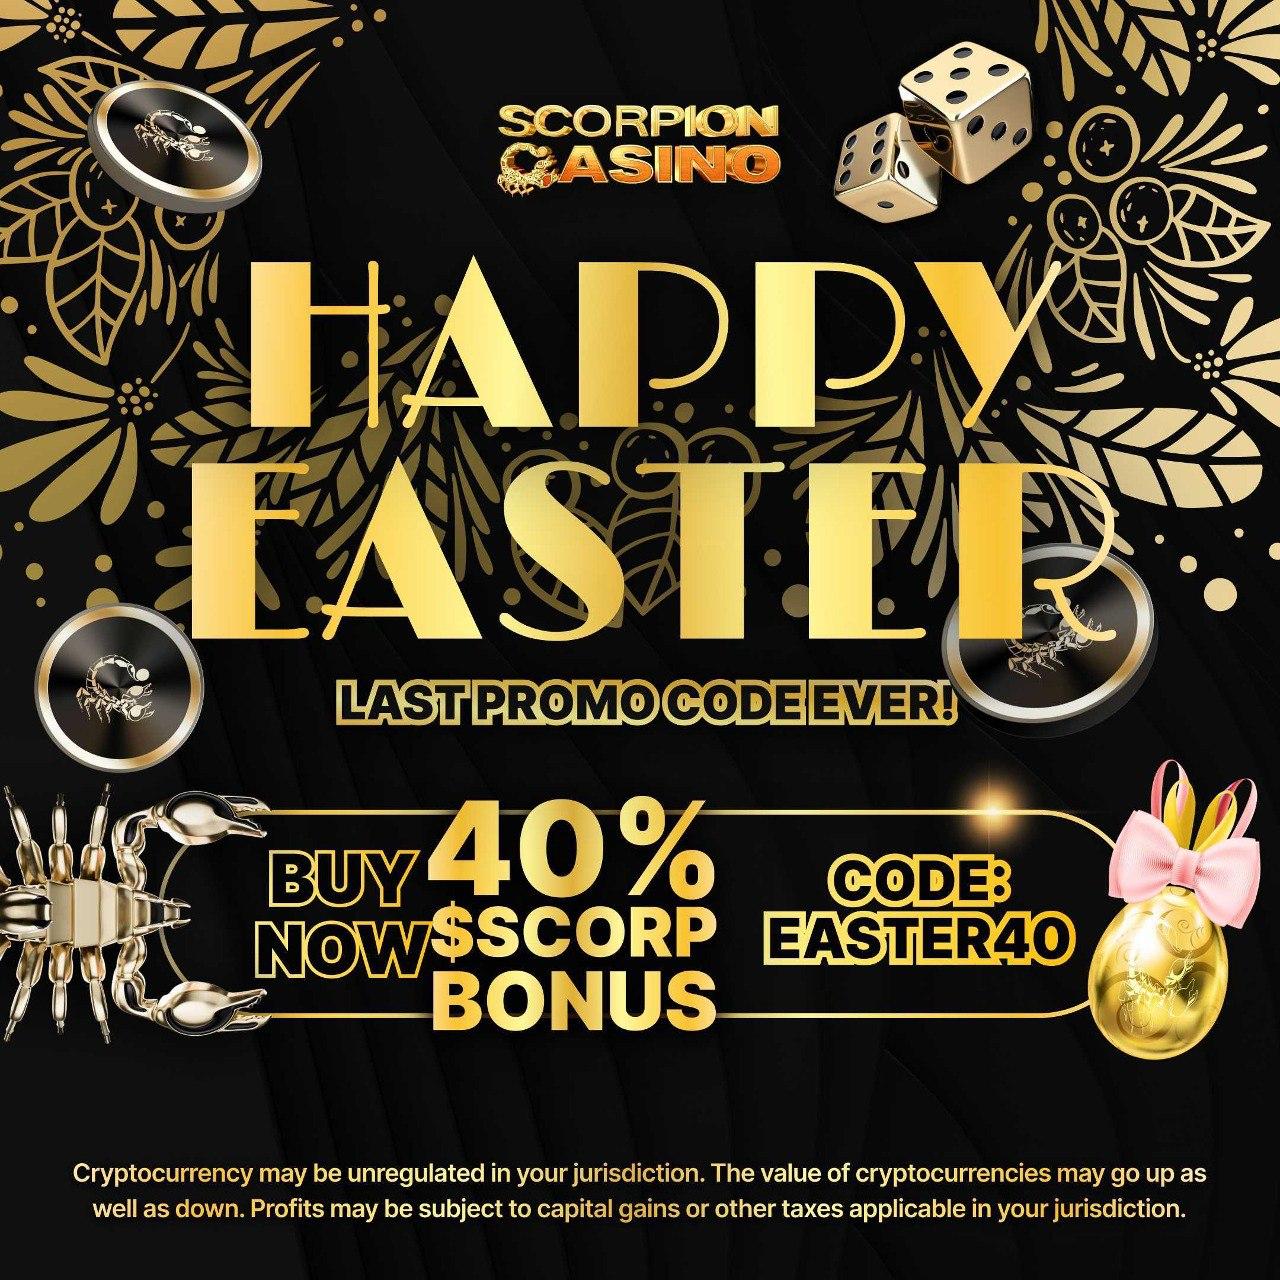 Easter with Scorpion Casino